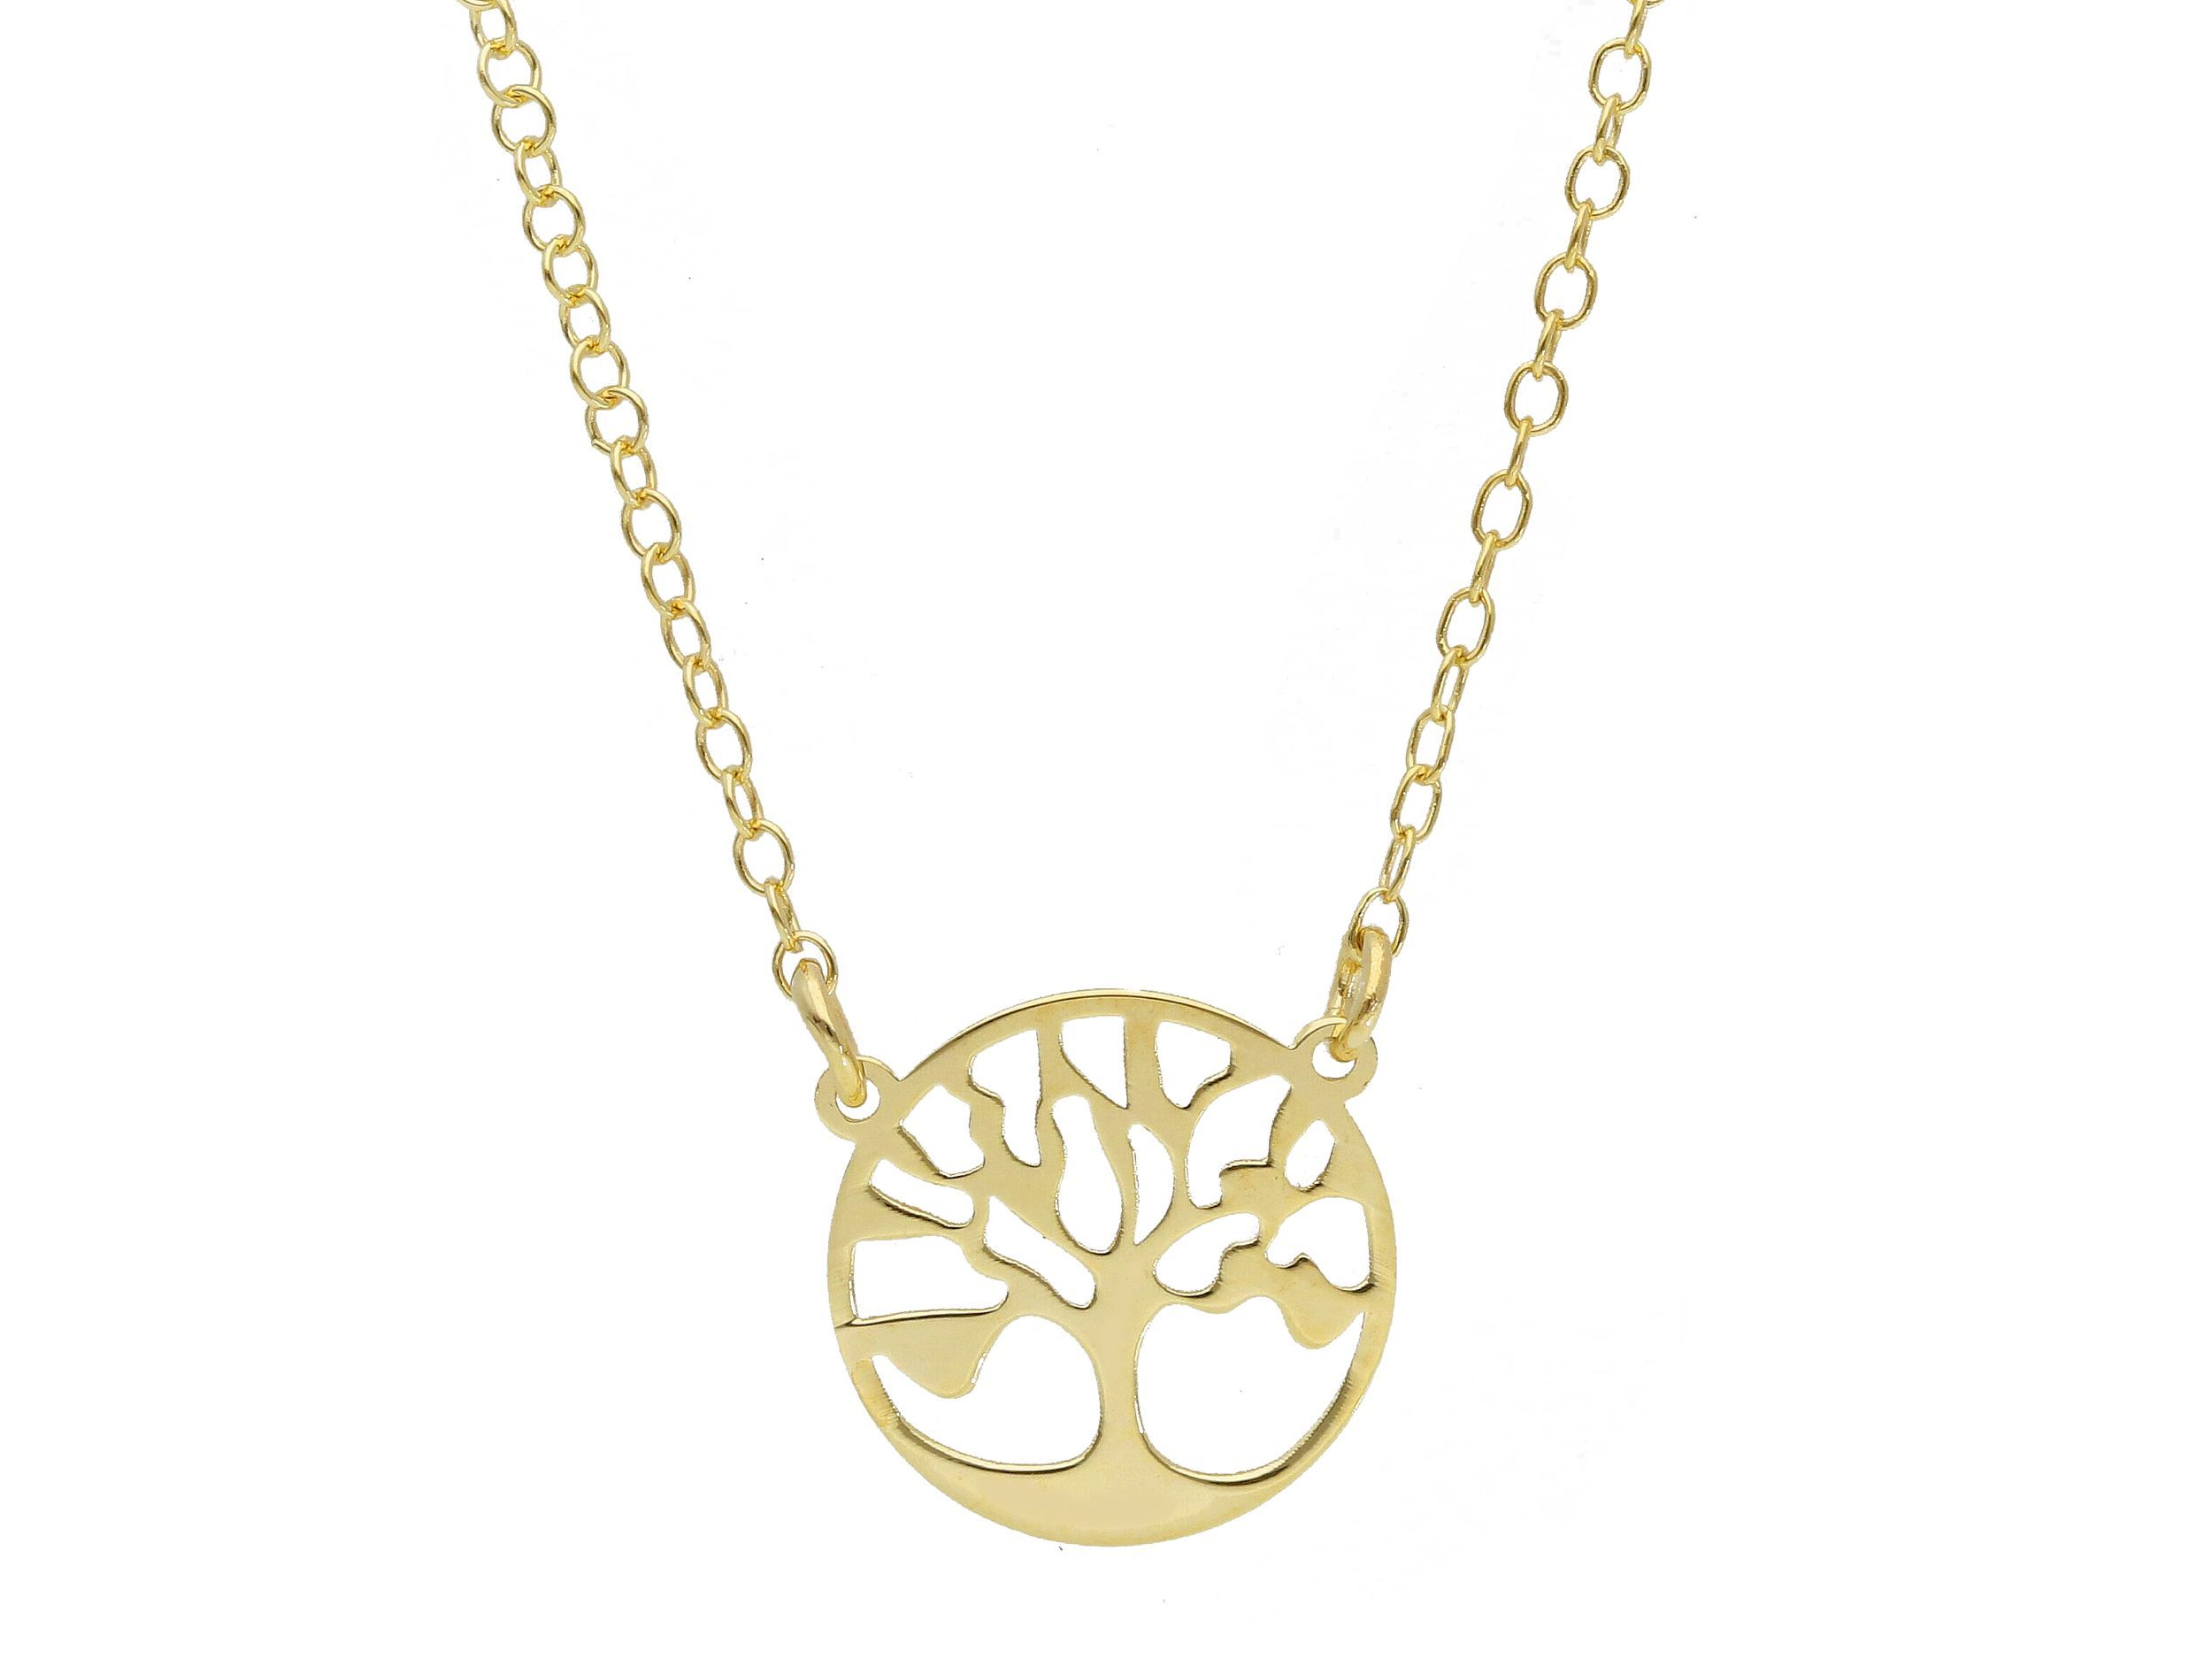 Golden necklace with the tree of life k14  (code S254951)